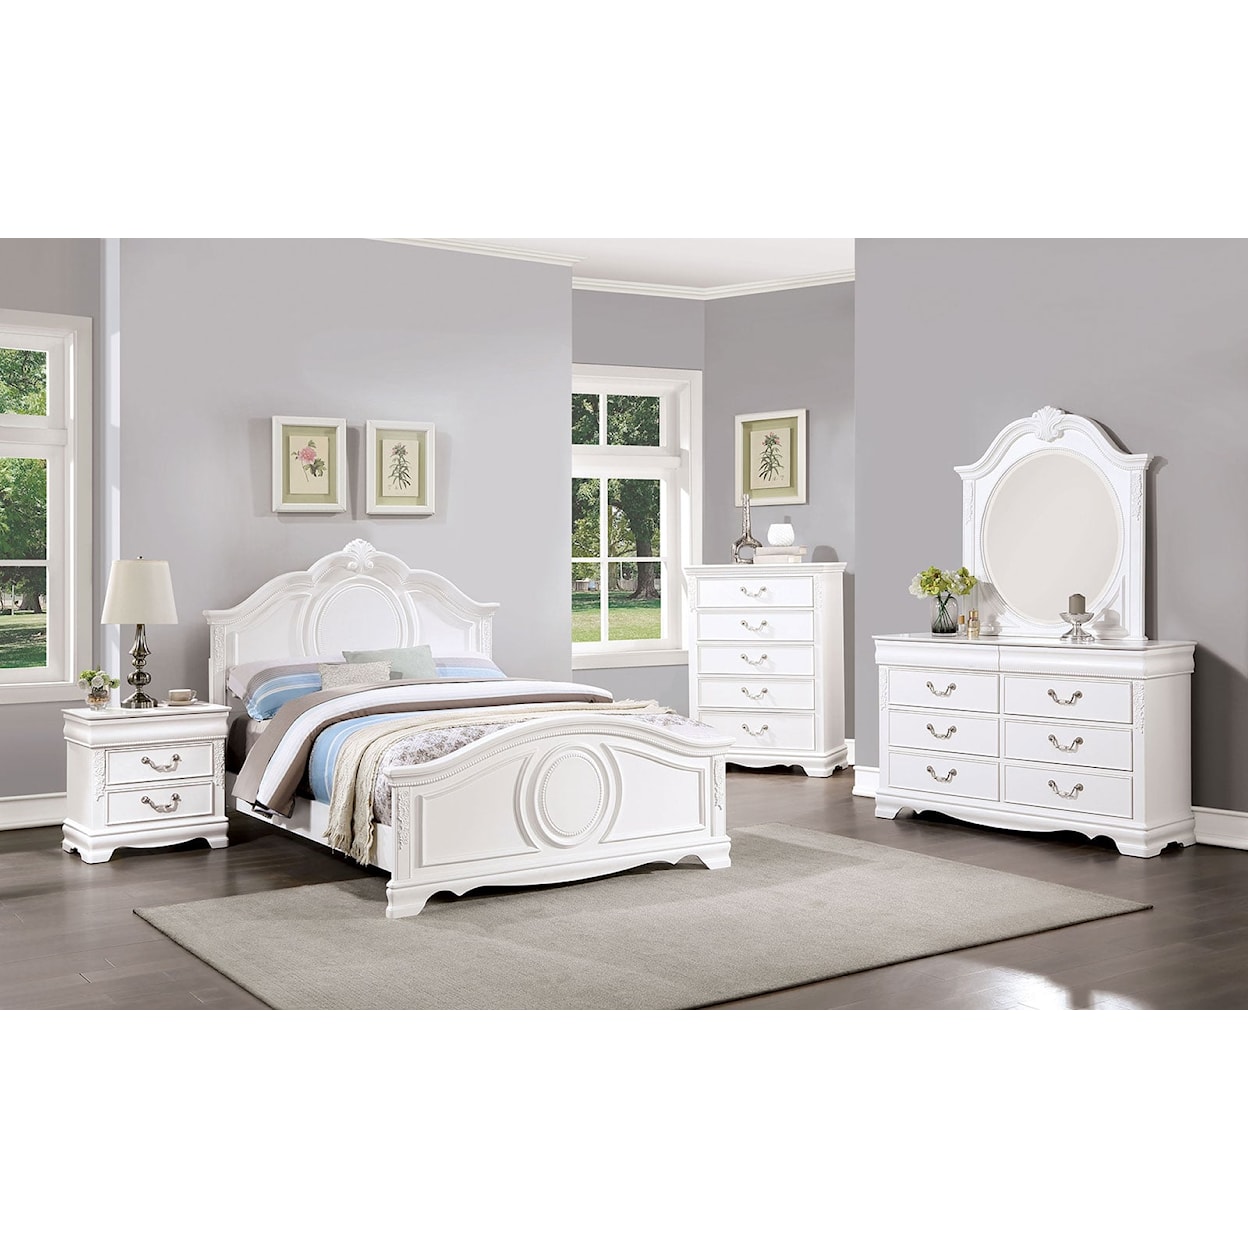 Furniture of America Alecia 4-Piece Twin Bedroom Set with Wood Details